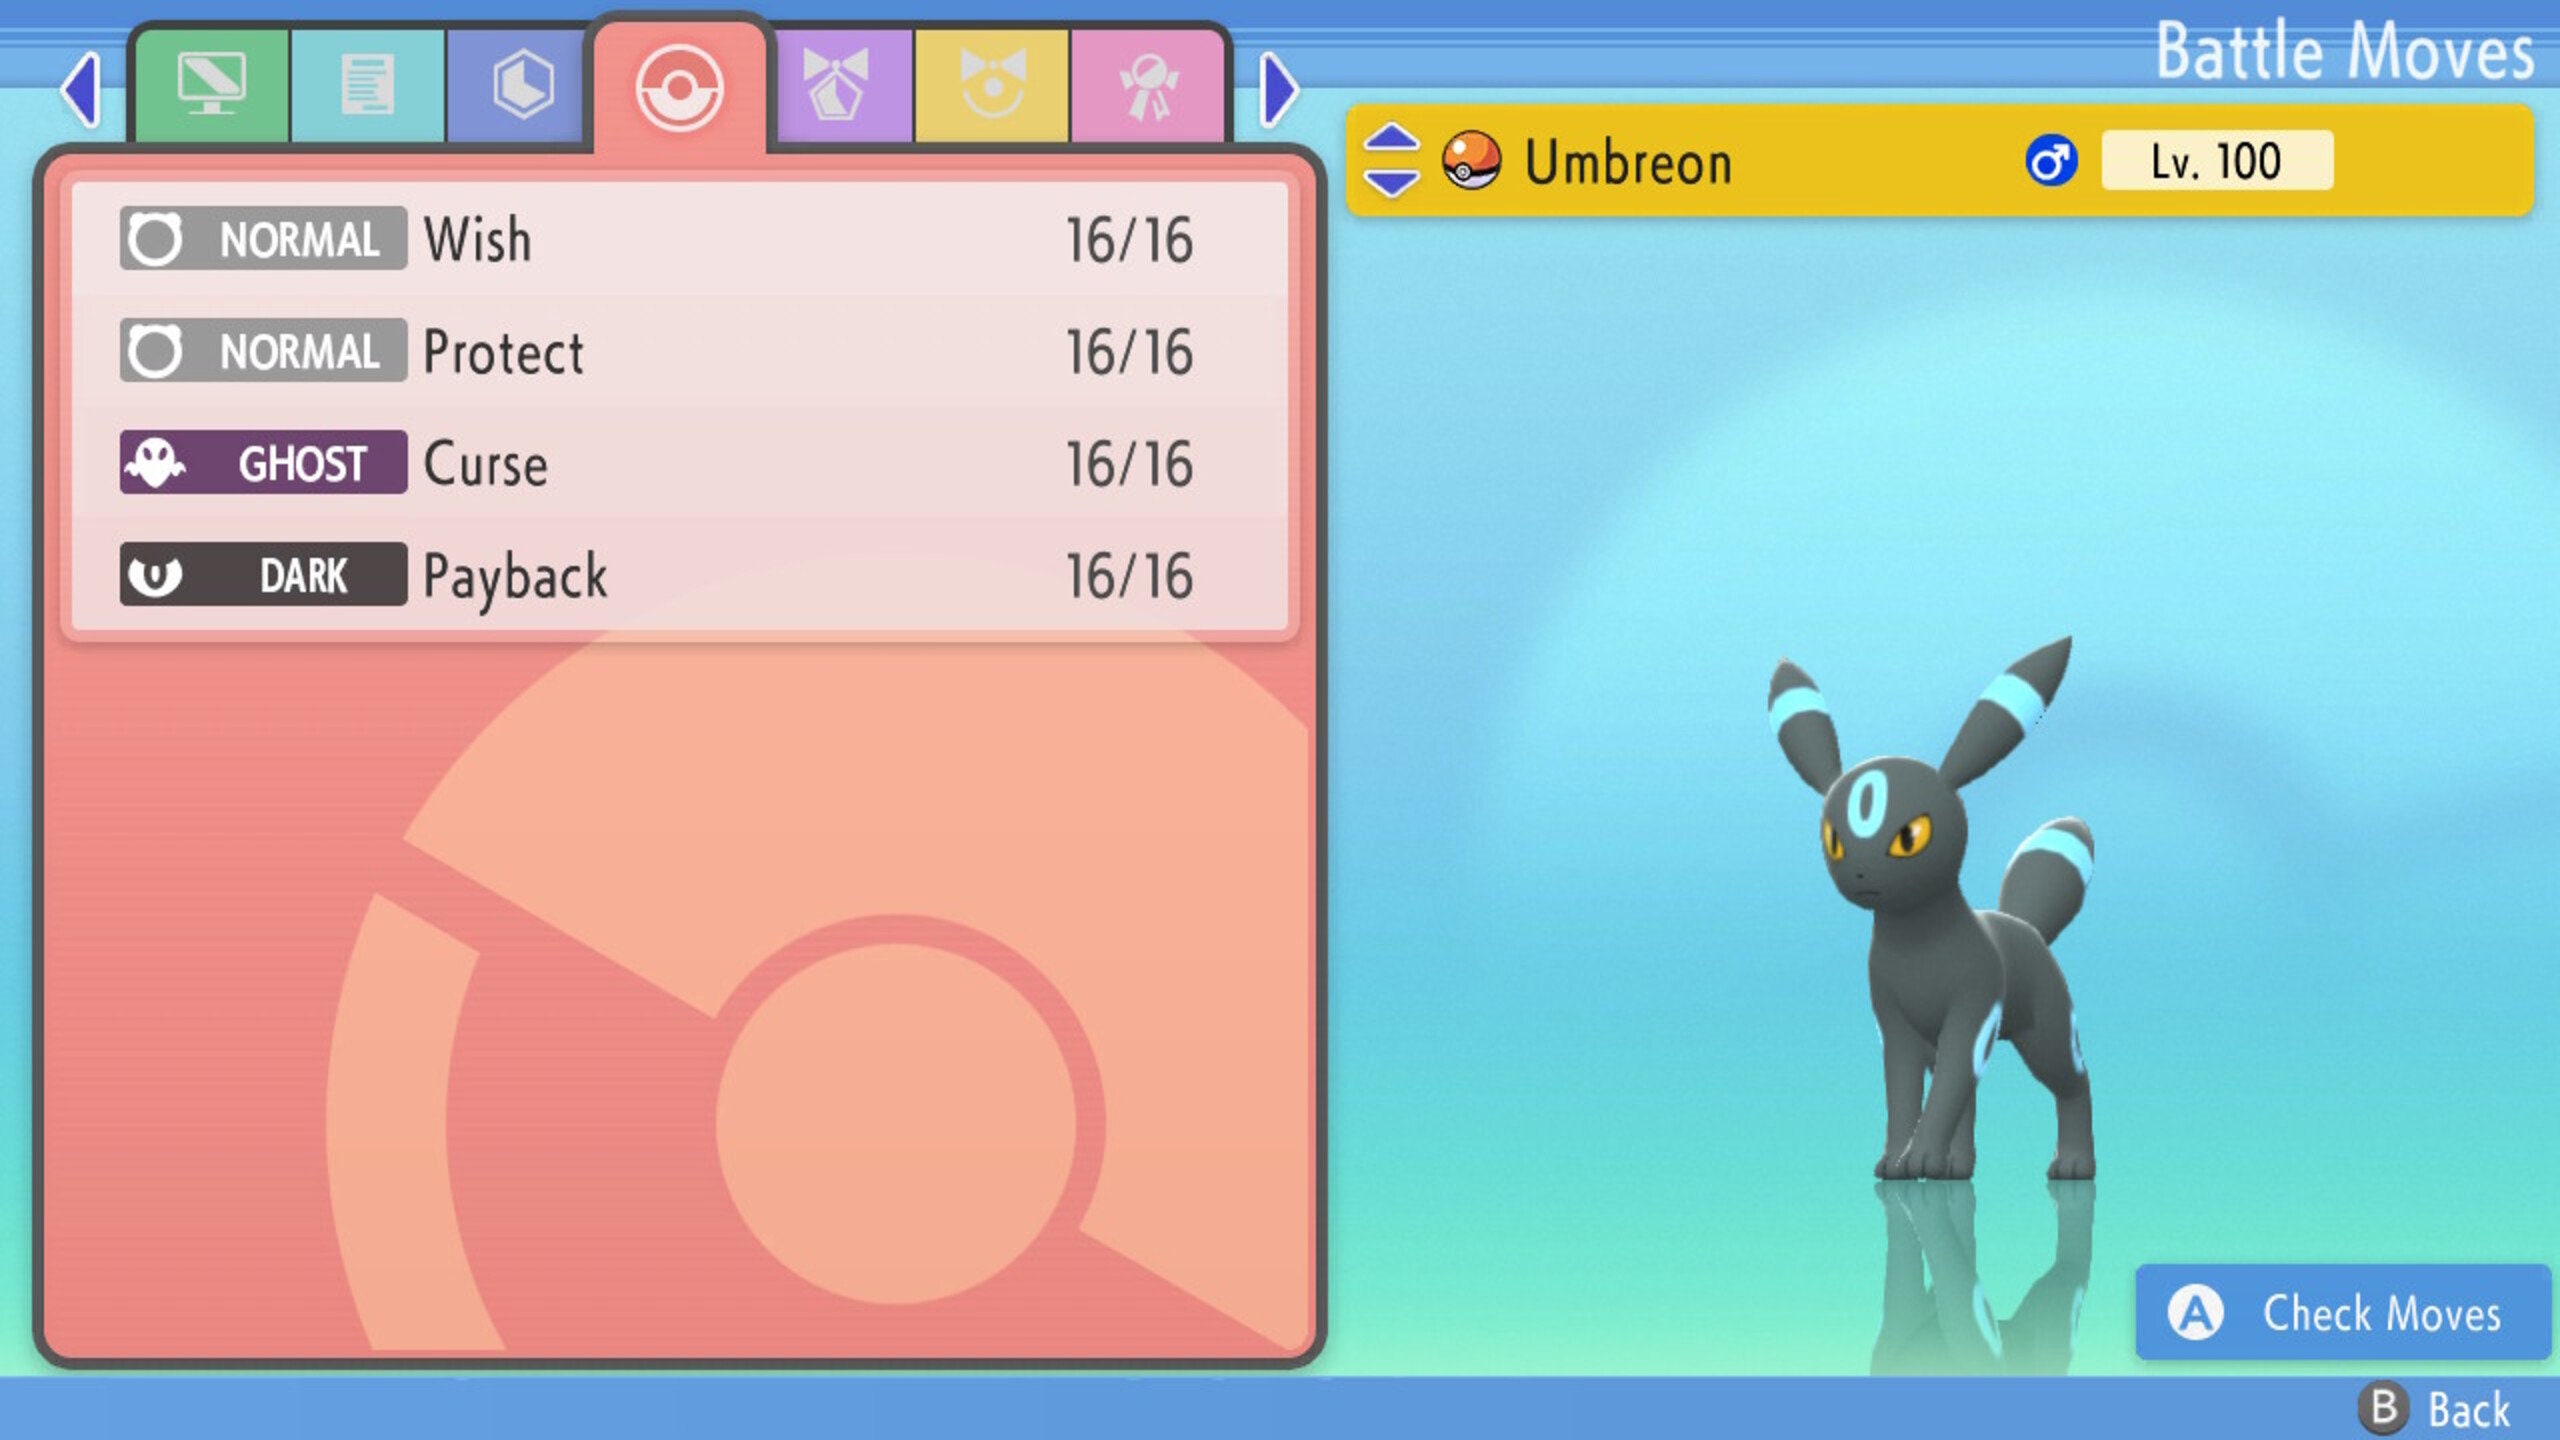 The best moveset for Umbreon in Pokemon Gold and Silver